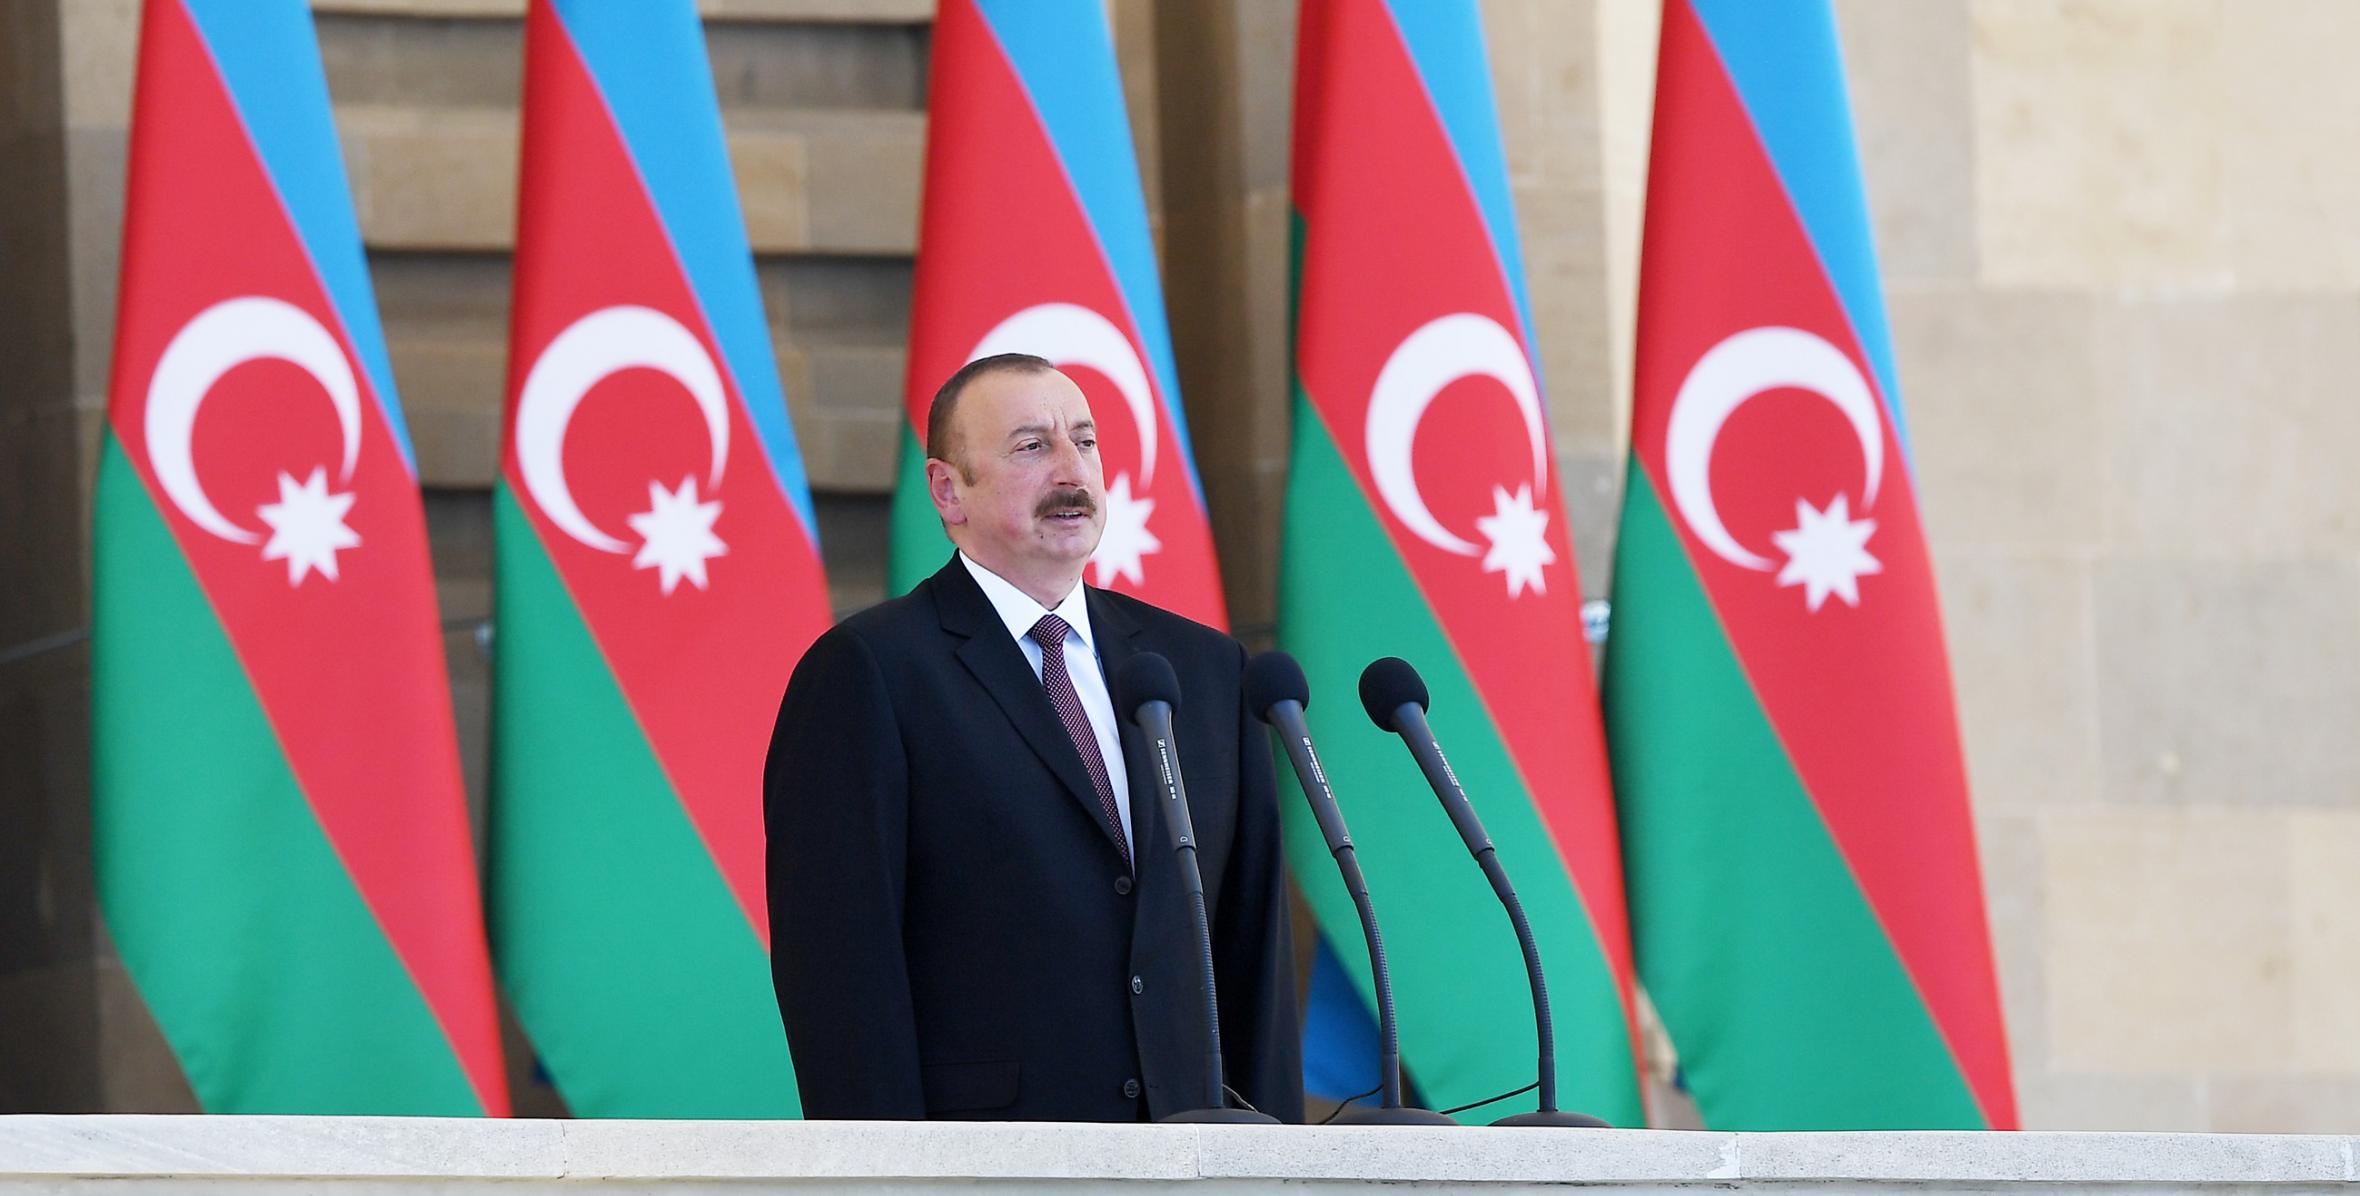 Speech by Ilham Aliyev at the official military parade on the occasion of the 100th anniversary of the Armed Forces